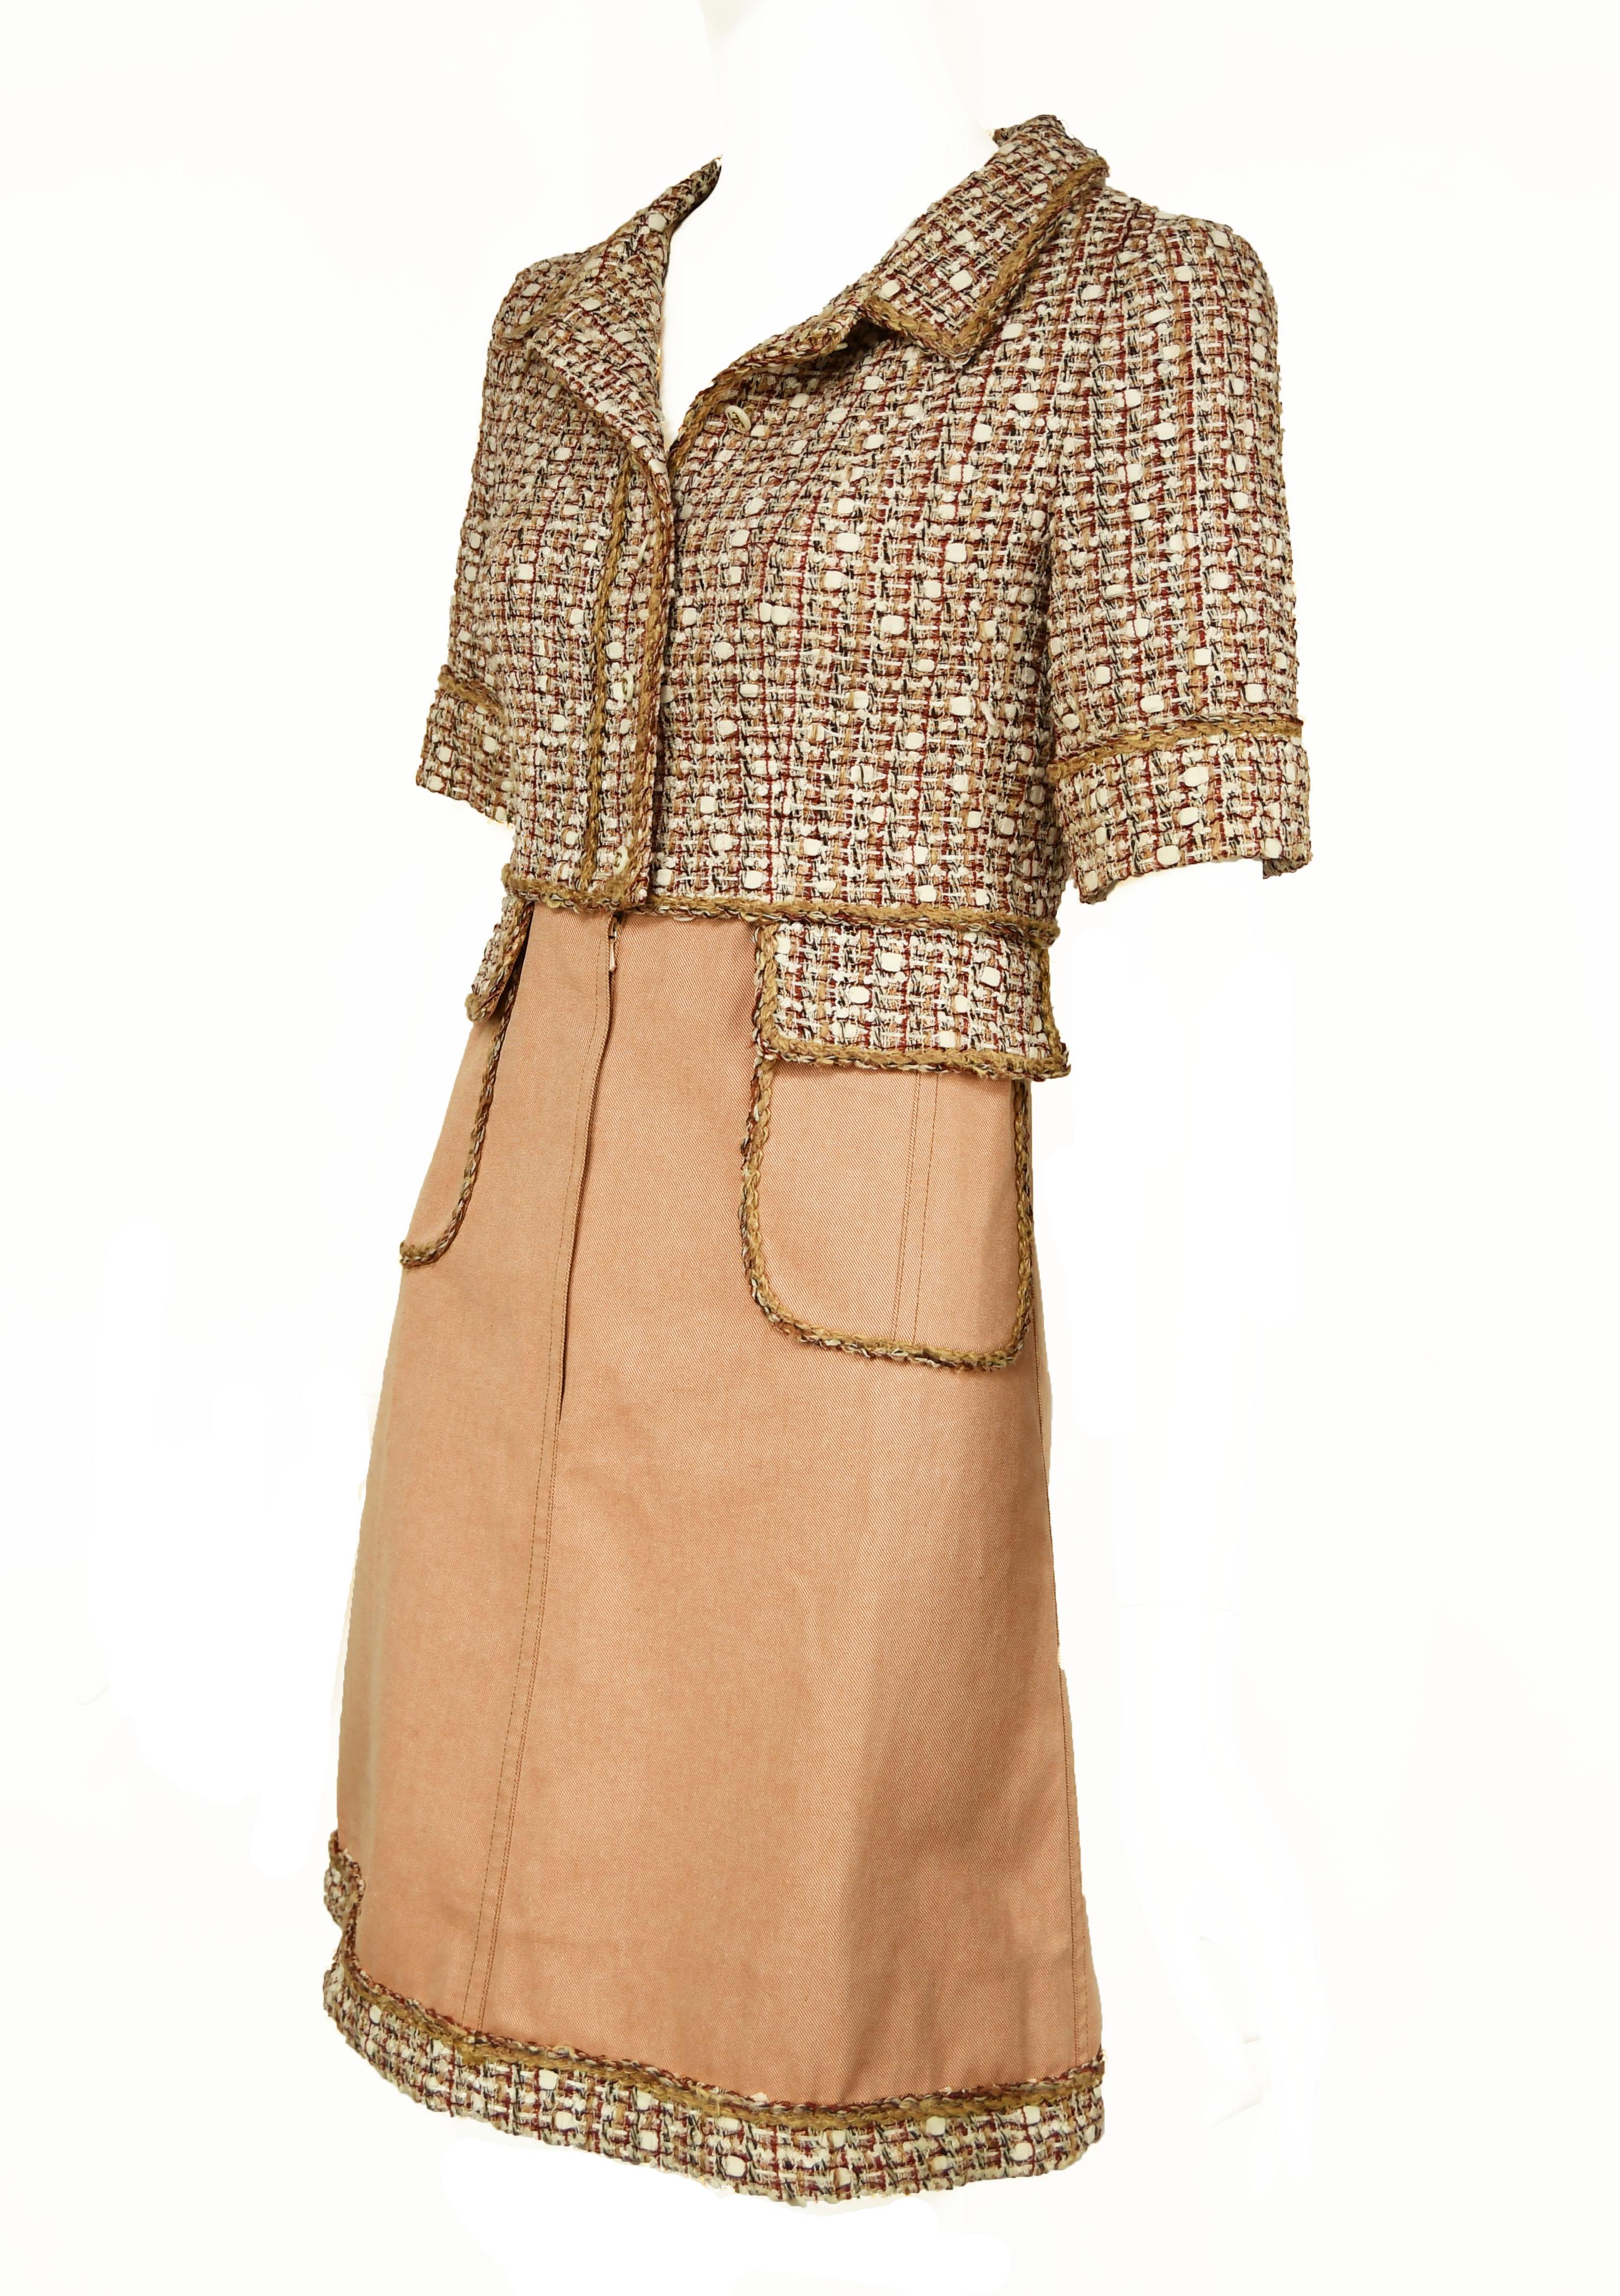 Classic Chanel A-Line dress made out of beautiful neutral tweed and twill fabric.  Off white buttons with gold 